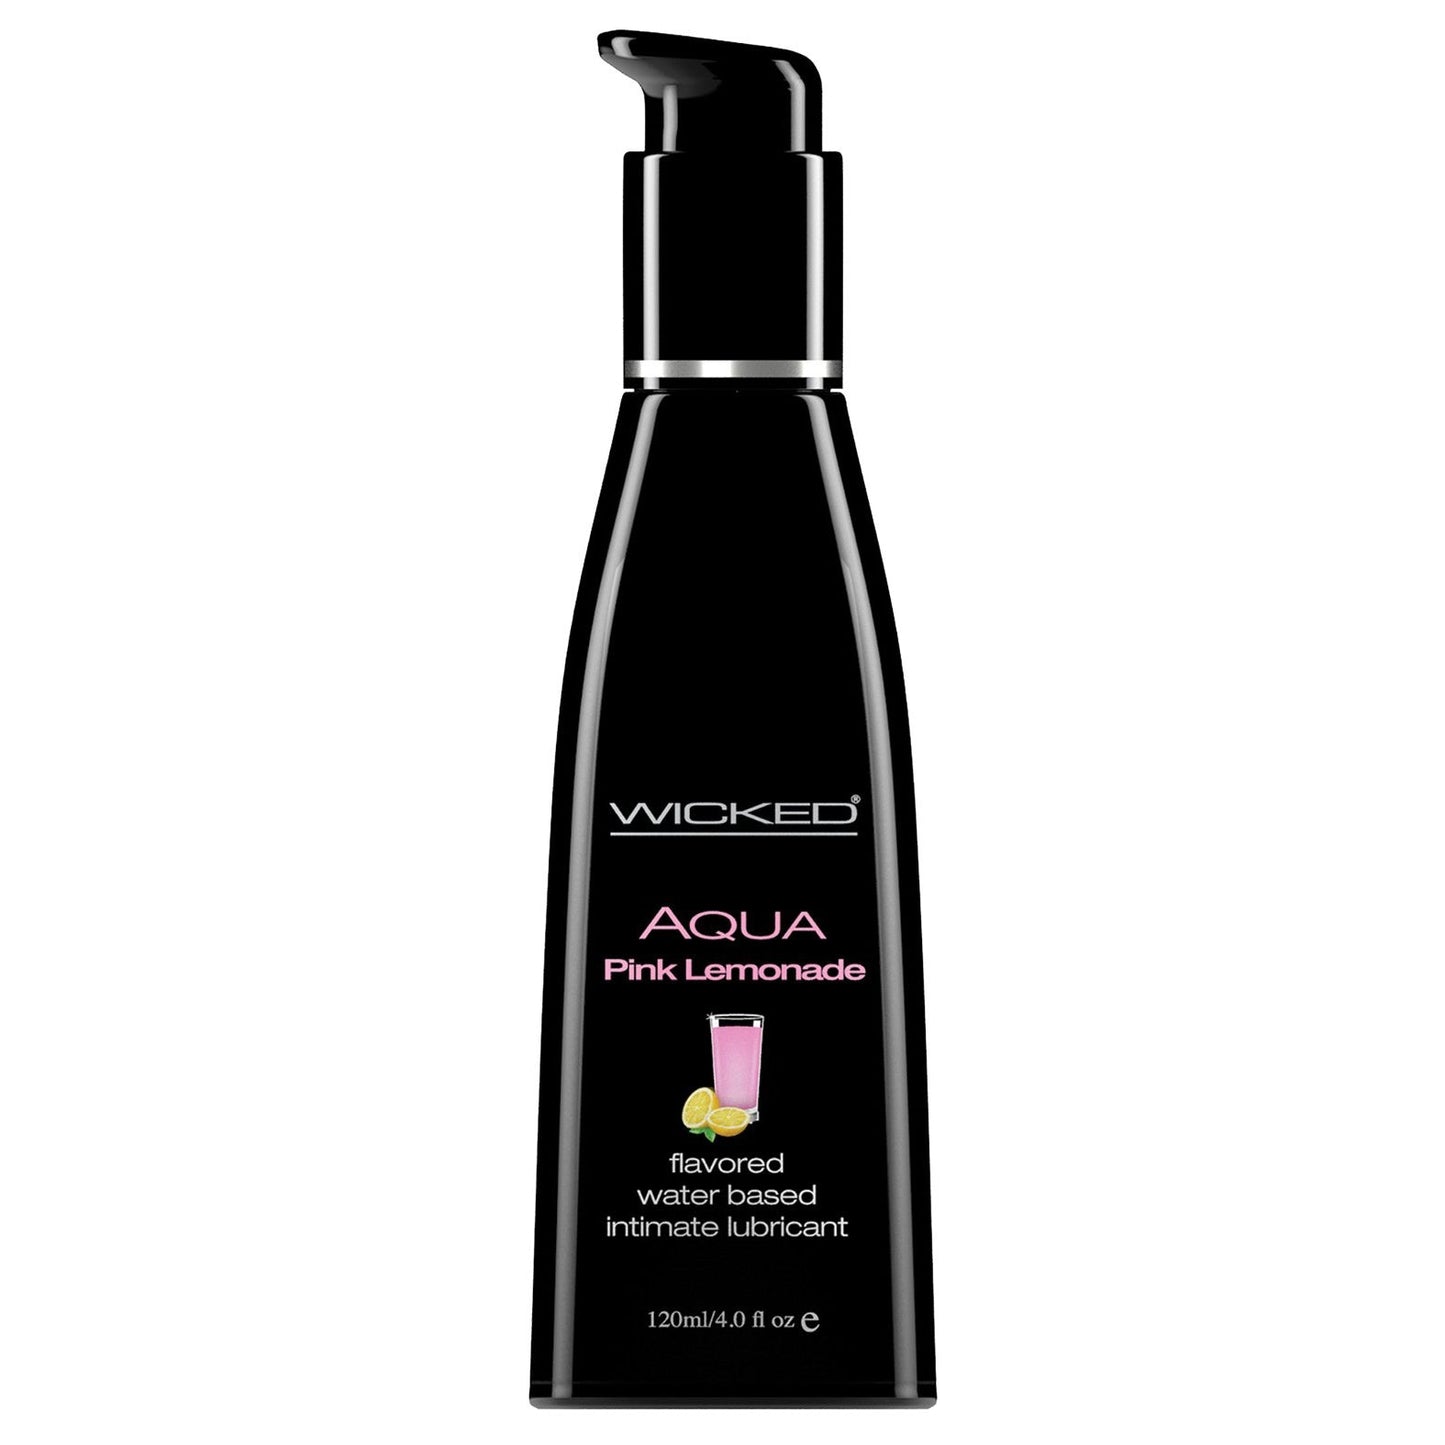 Wicked Sensual Care Aqua Water Based Ludricant - Flavored